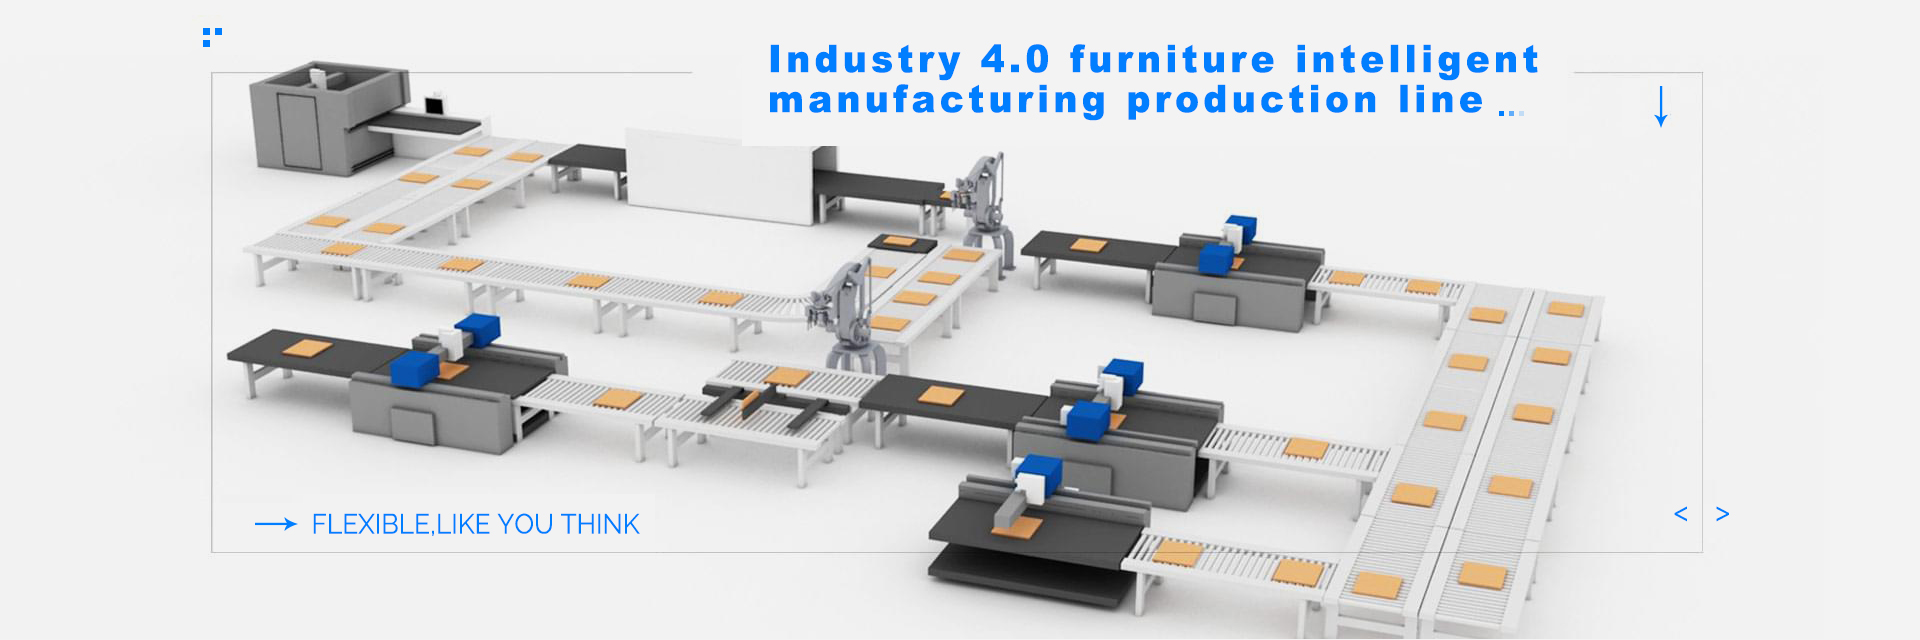 Industry 4.0 furniture intelligent manufacturing production line